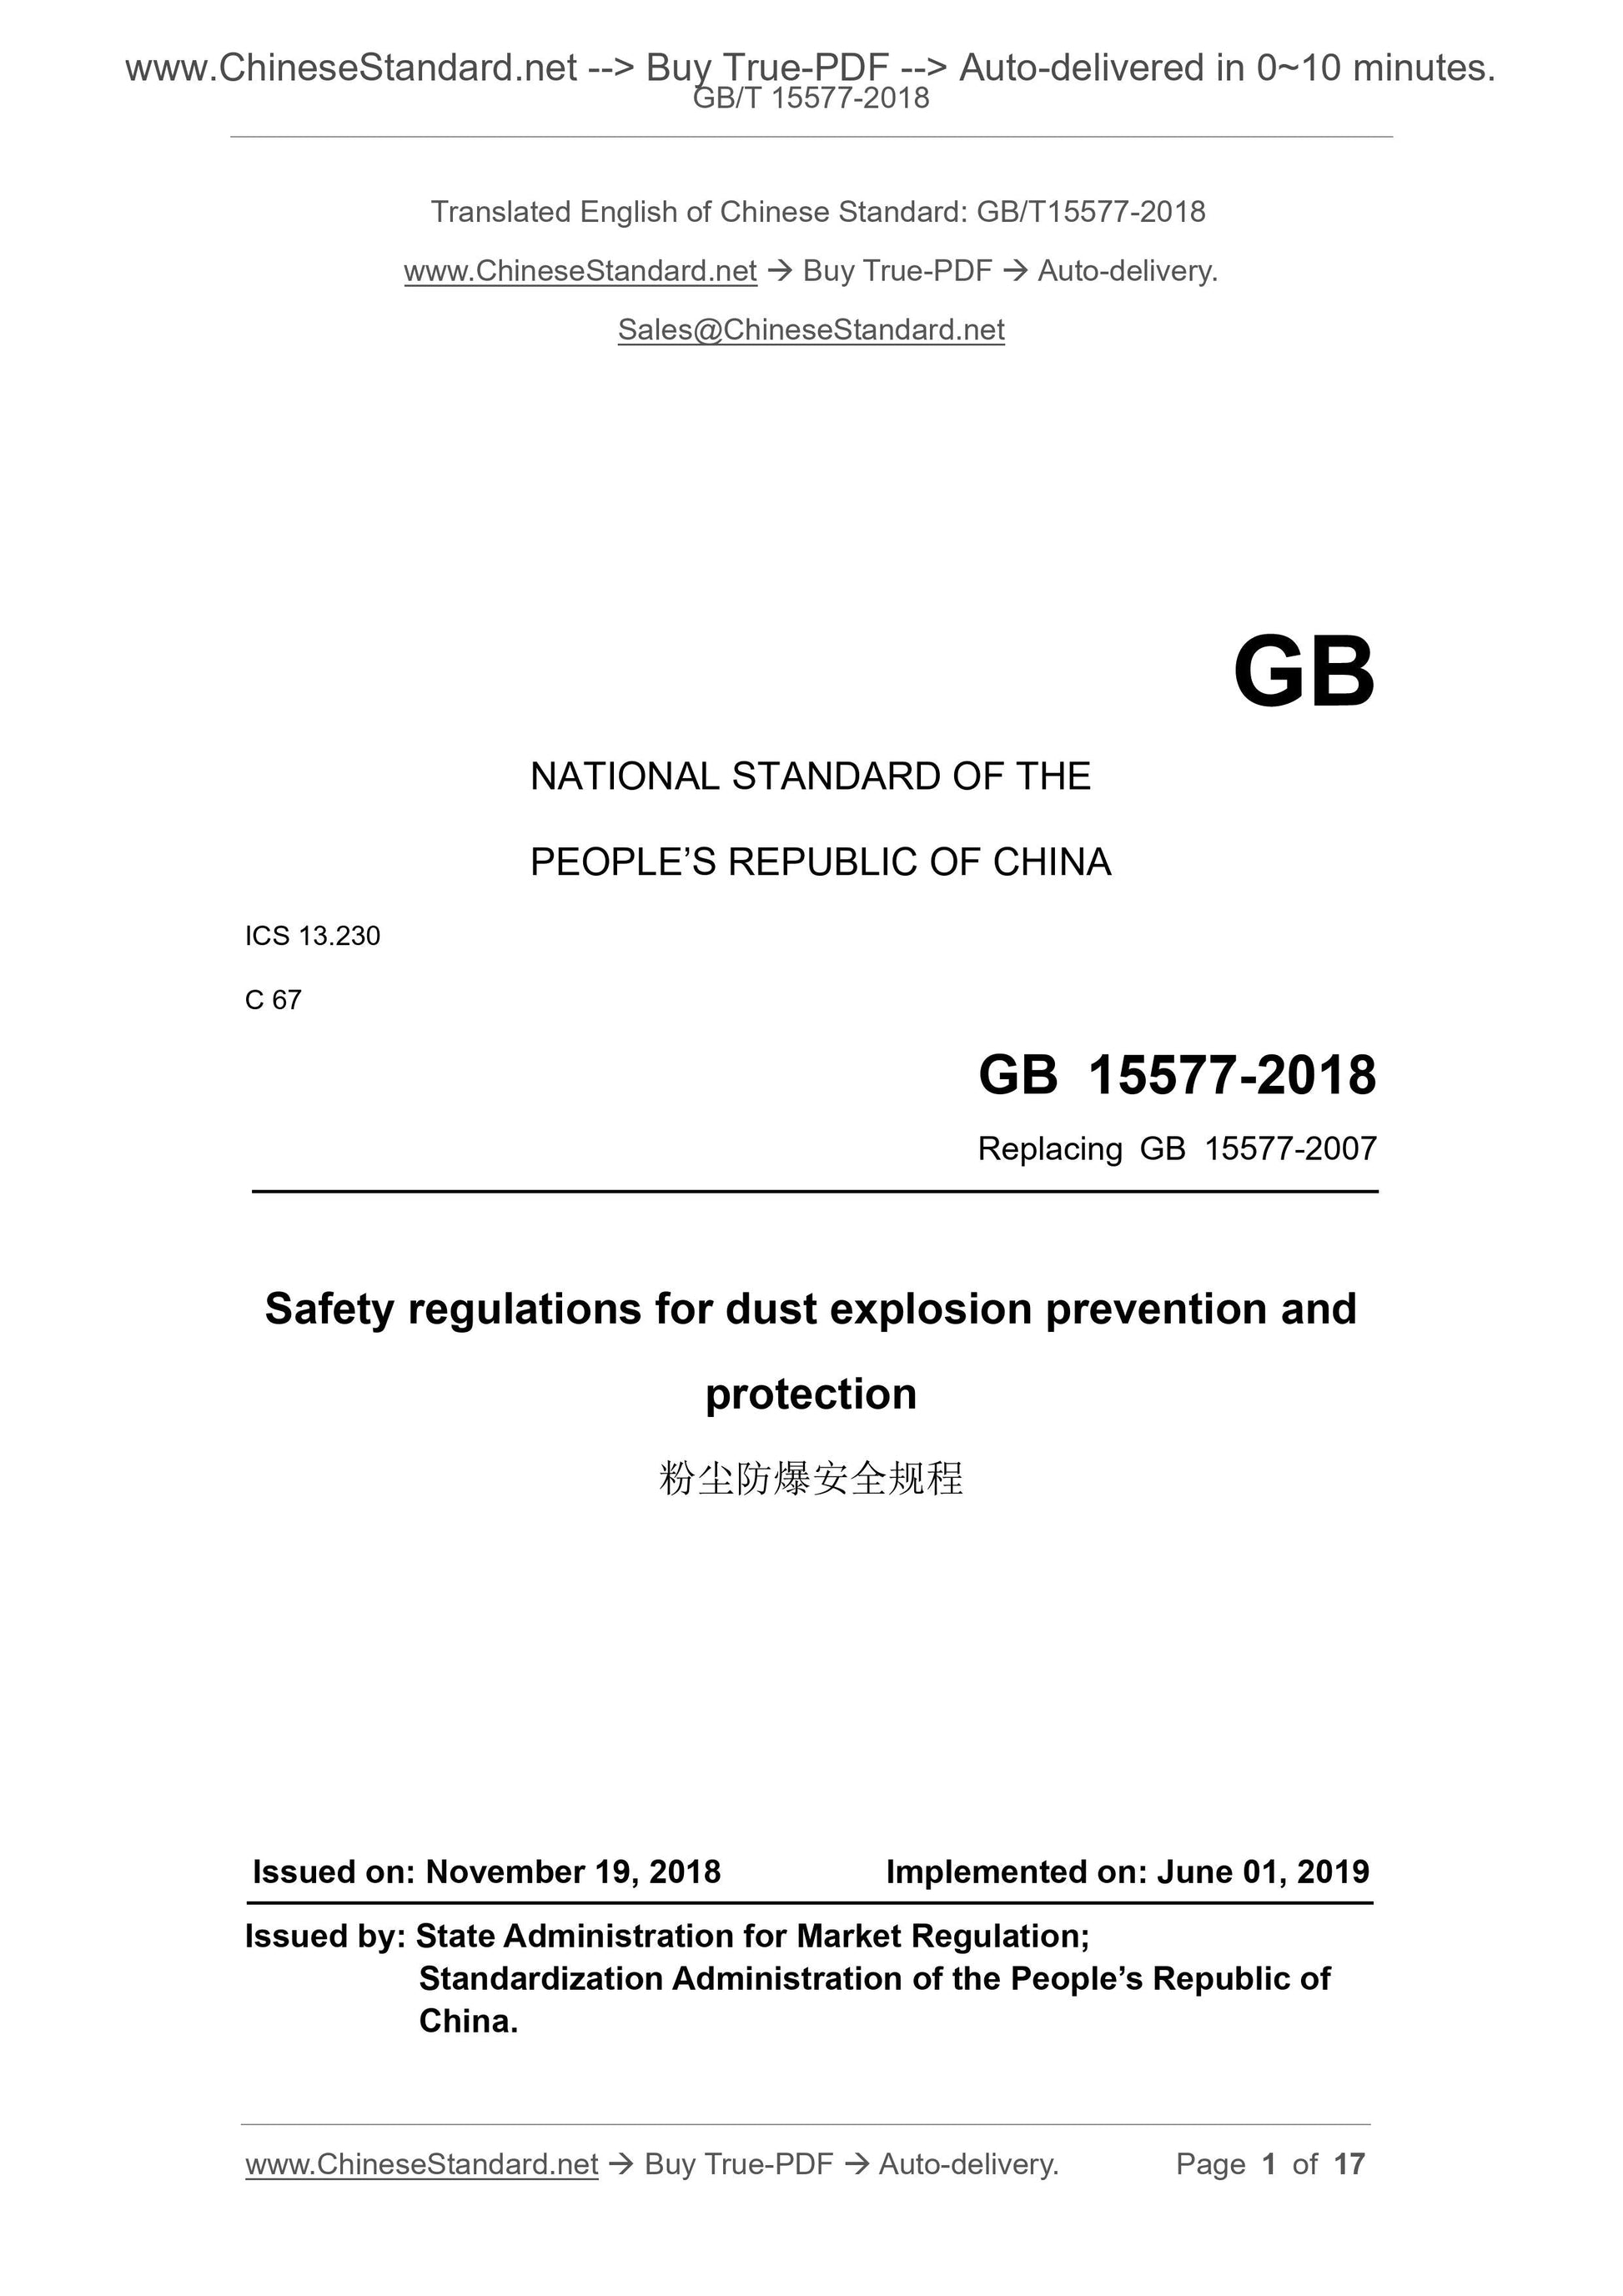 GB 15577-2018 Page 1